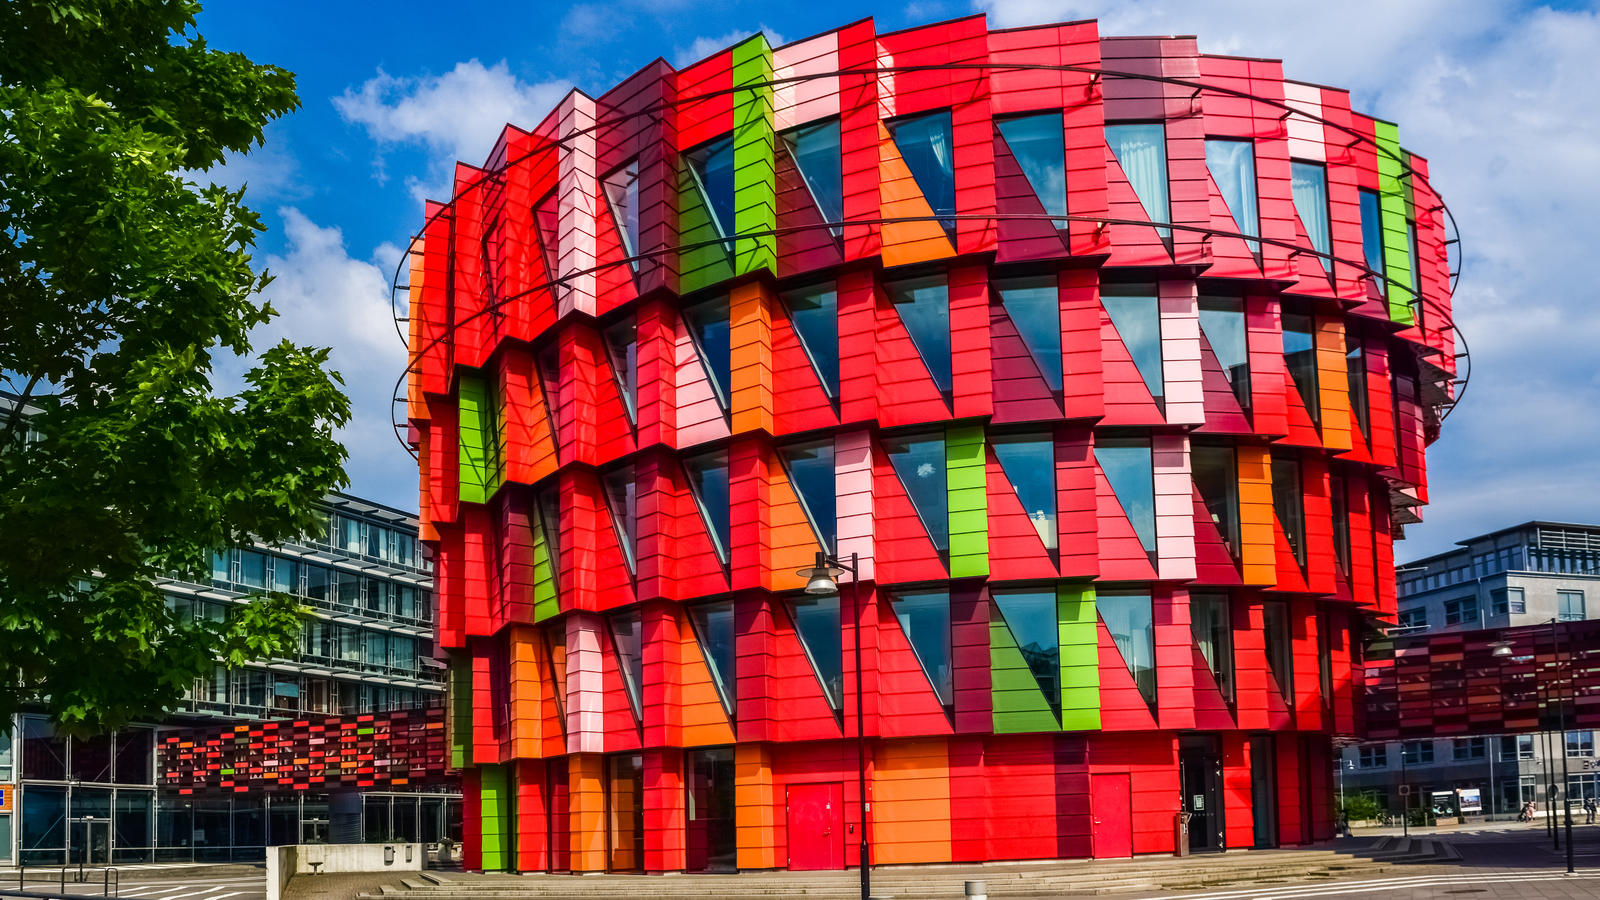 Colorful building with many windows